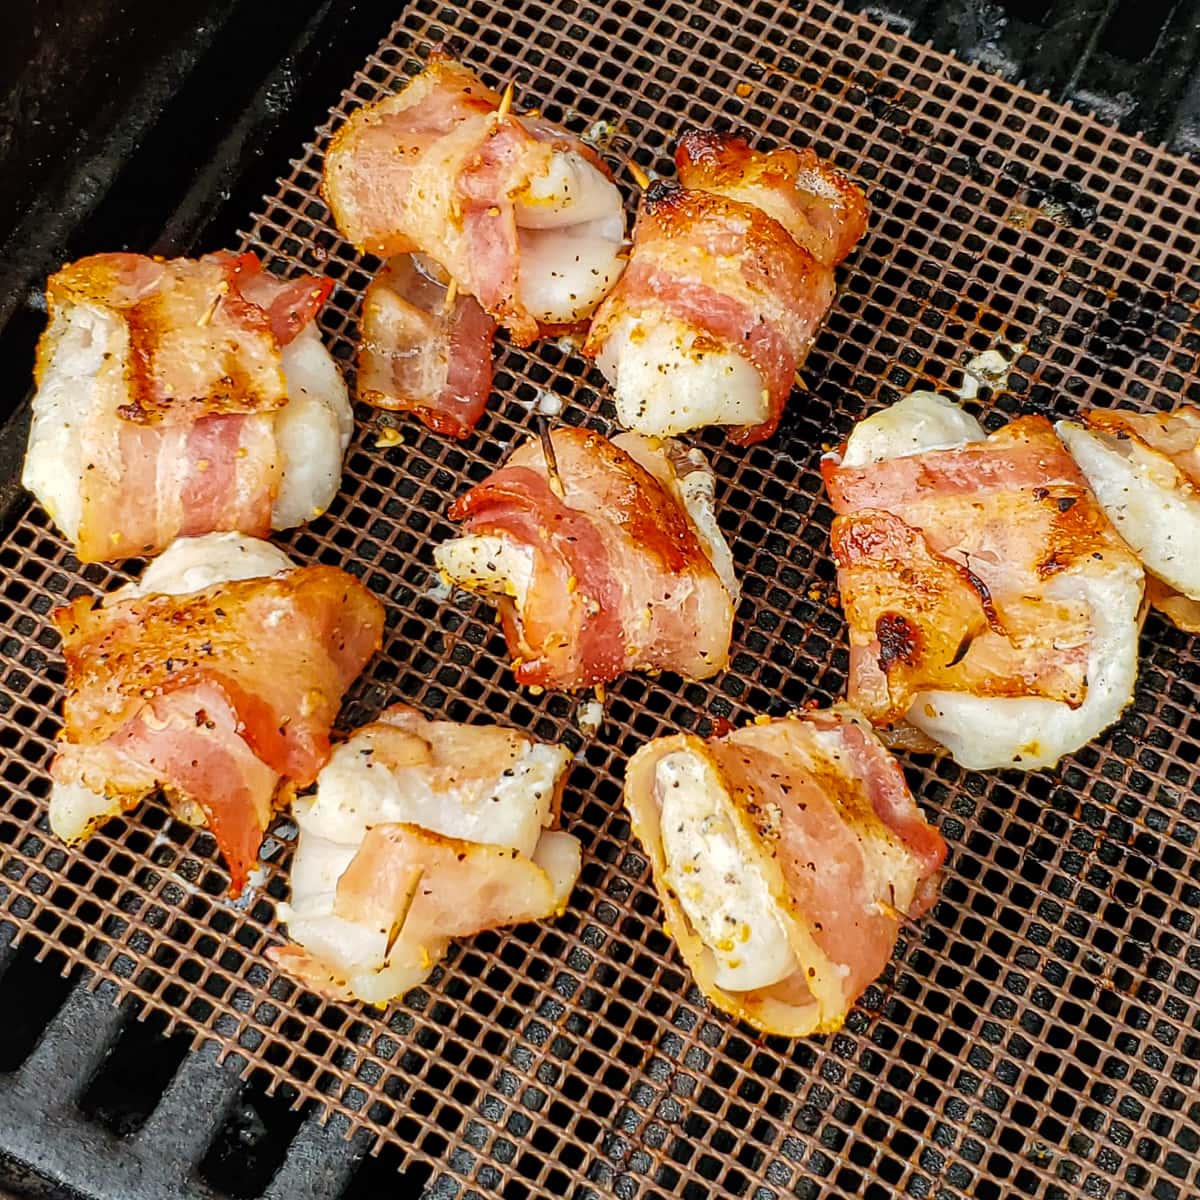 Bacon wrapped halibut bites on a Big Green Egg.